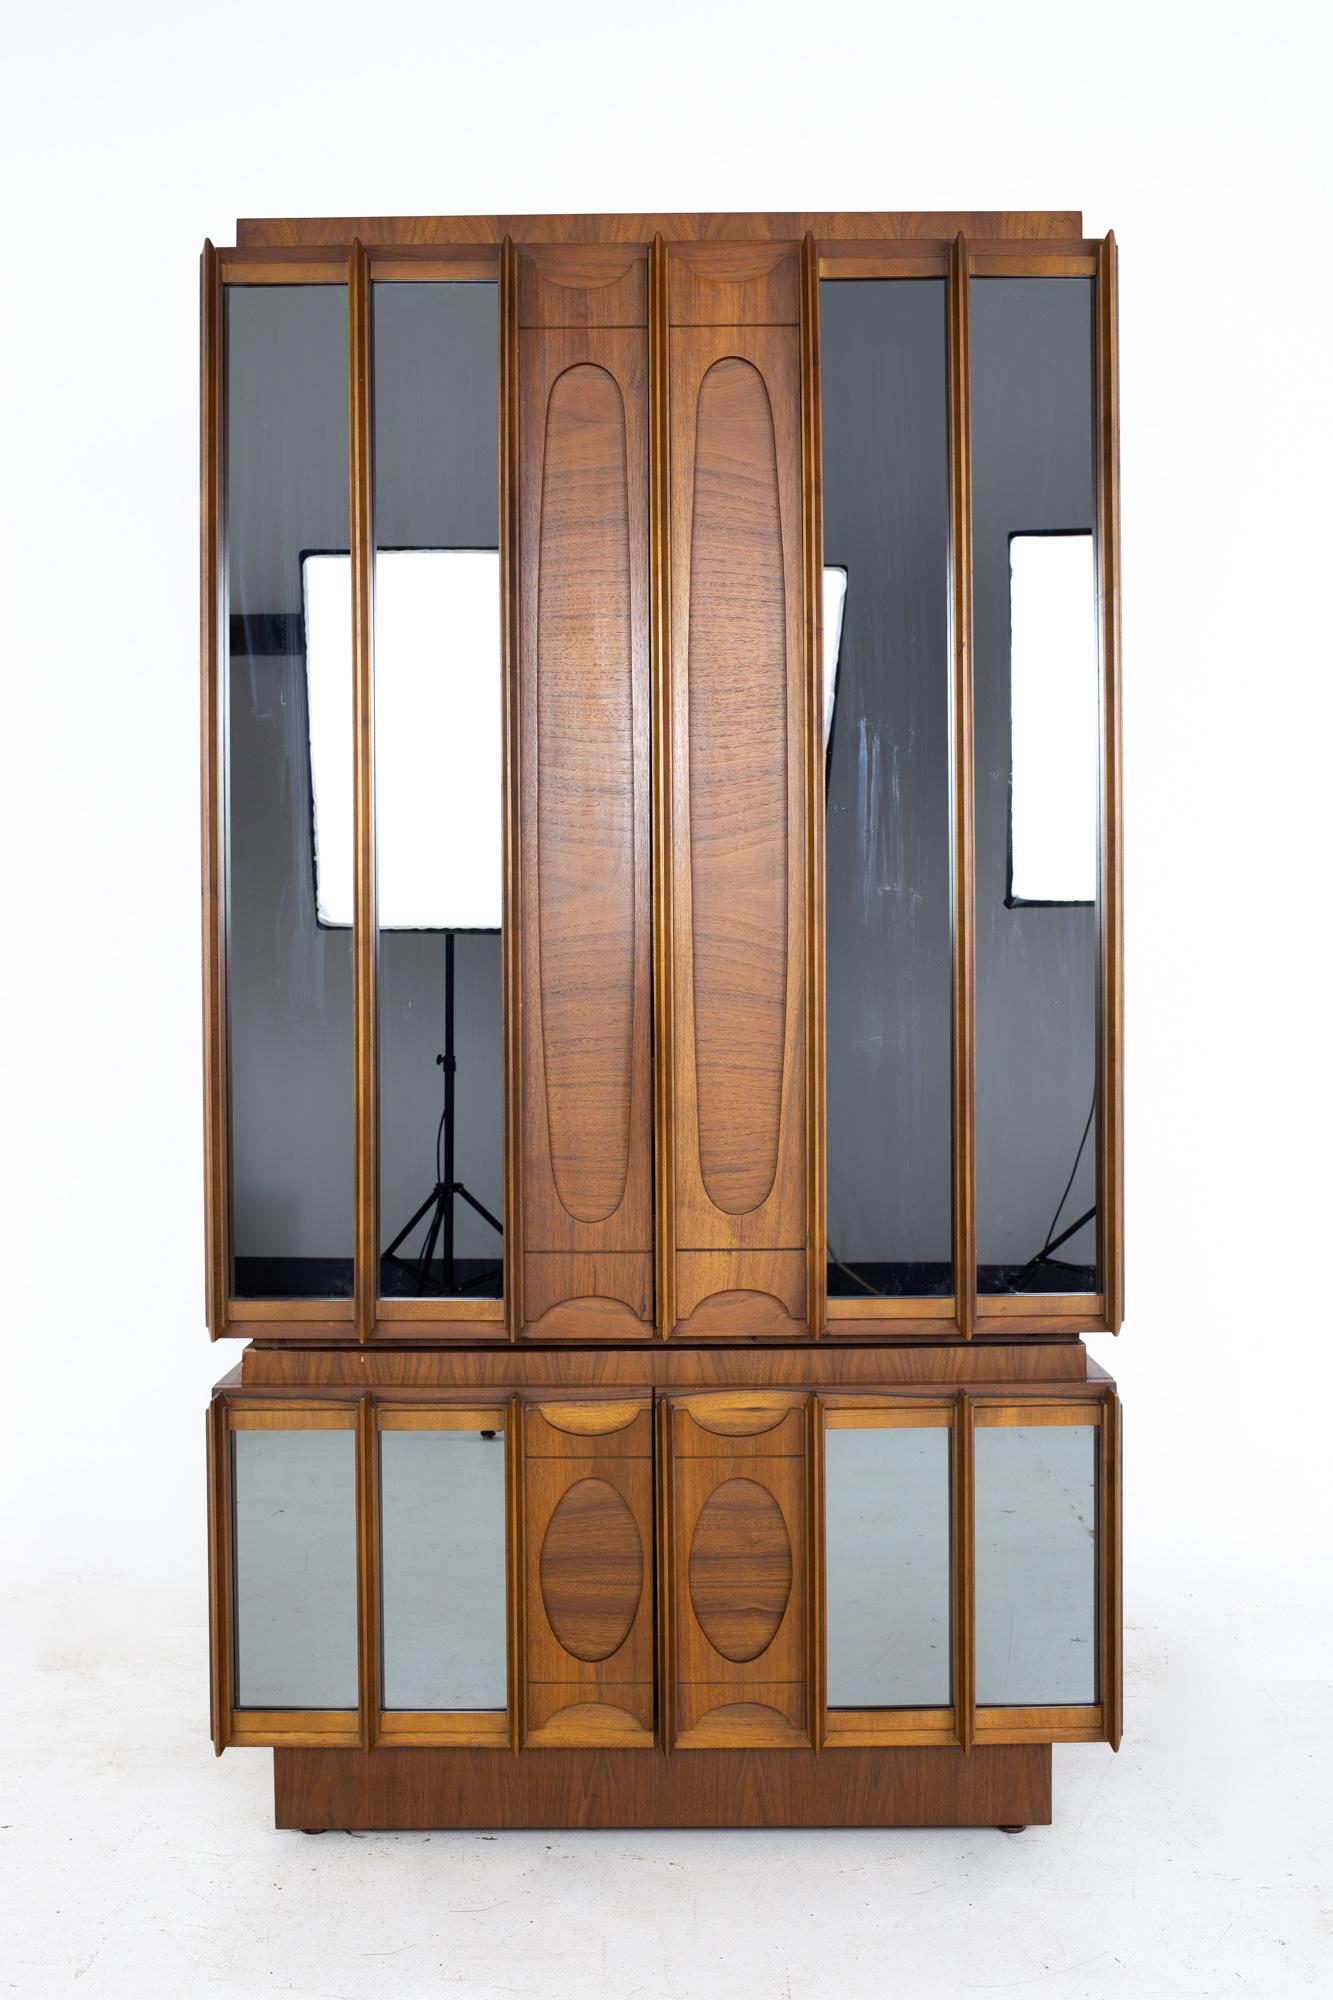 Tobago Brutalist mid century walnut and mirror armoire
Armoire measures: 40 wide x 21.75 deep x 73 inches high

All pieces of furniture can be had in what we call restored vintage condition. That means the piece is restored upon purchase so it’s